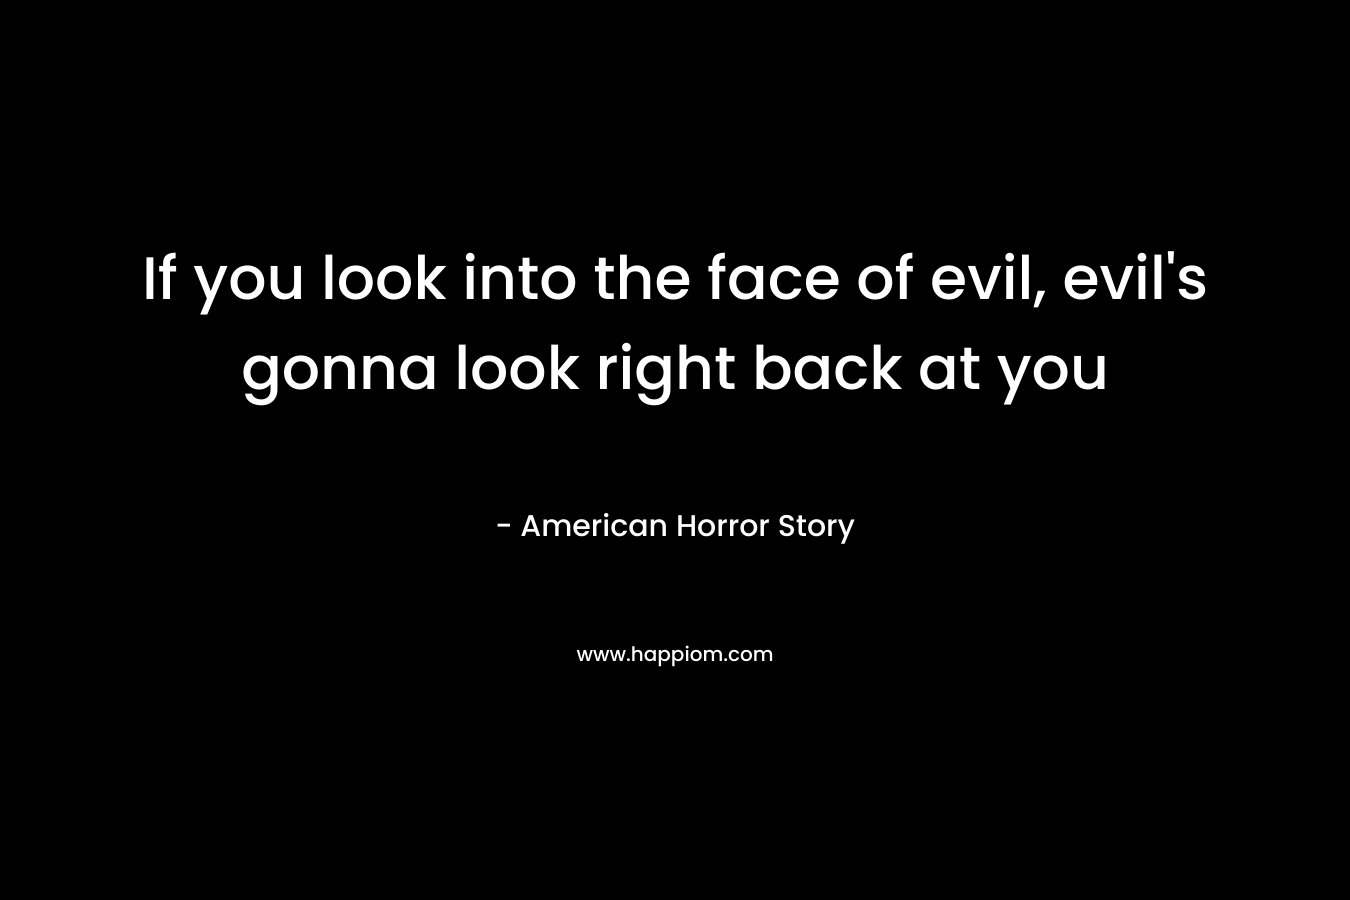 If you look into the face of evil, evil’s gonna look right back at you – American Horror Story